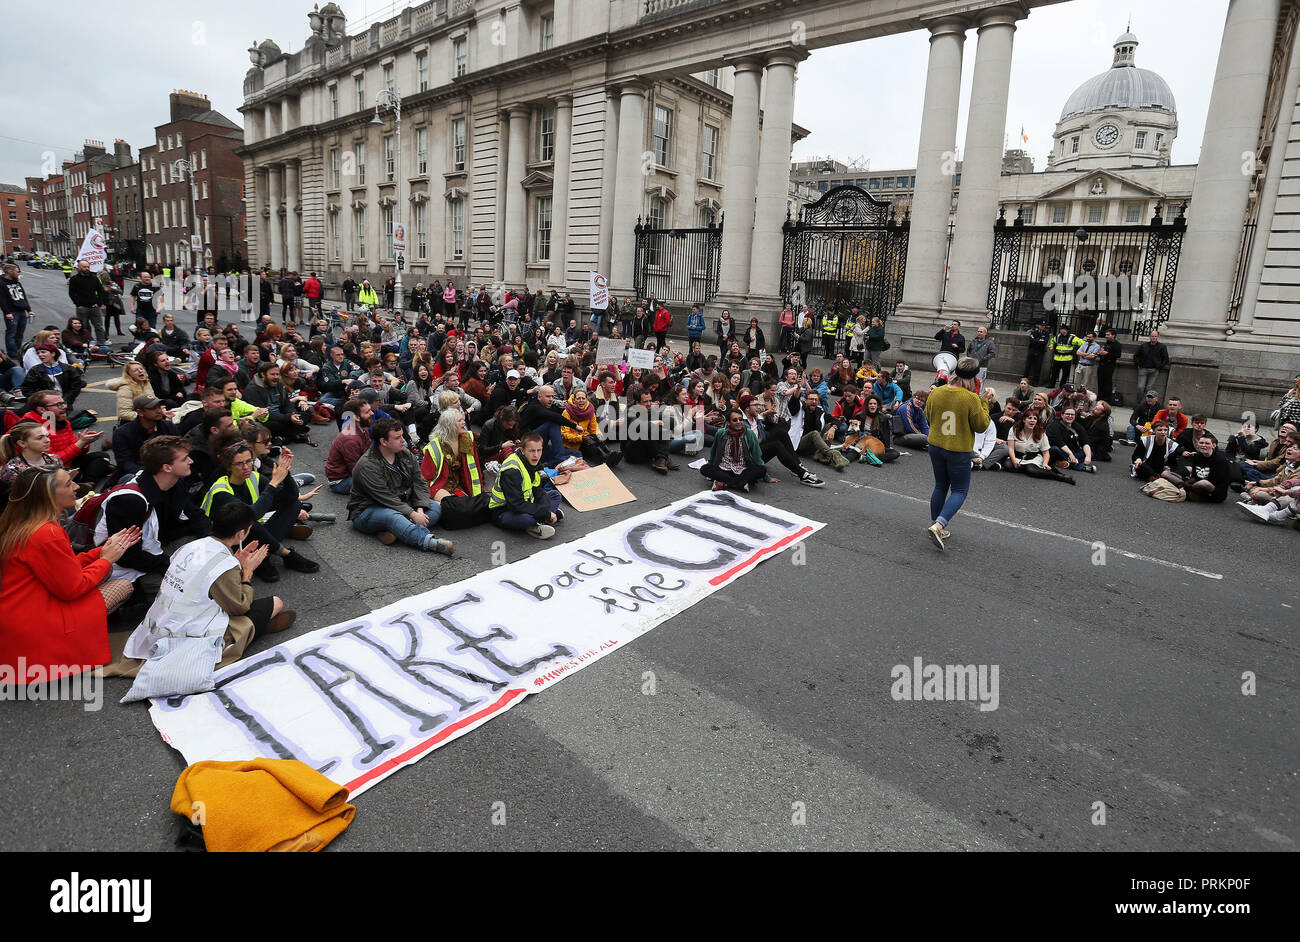 People stage a sit down protest outside the Department of An Taoiseach in Dublin's city centre following a Raise the Roof housing rights protest. Stock Photo